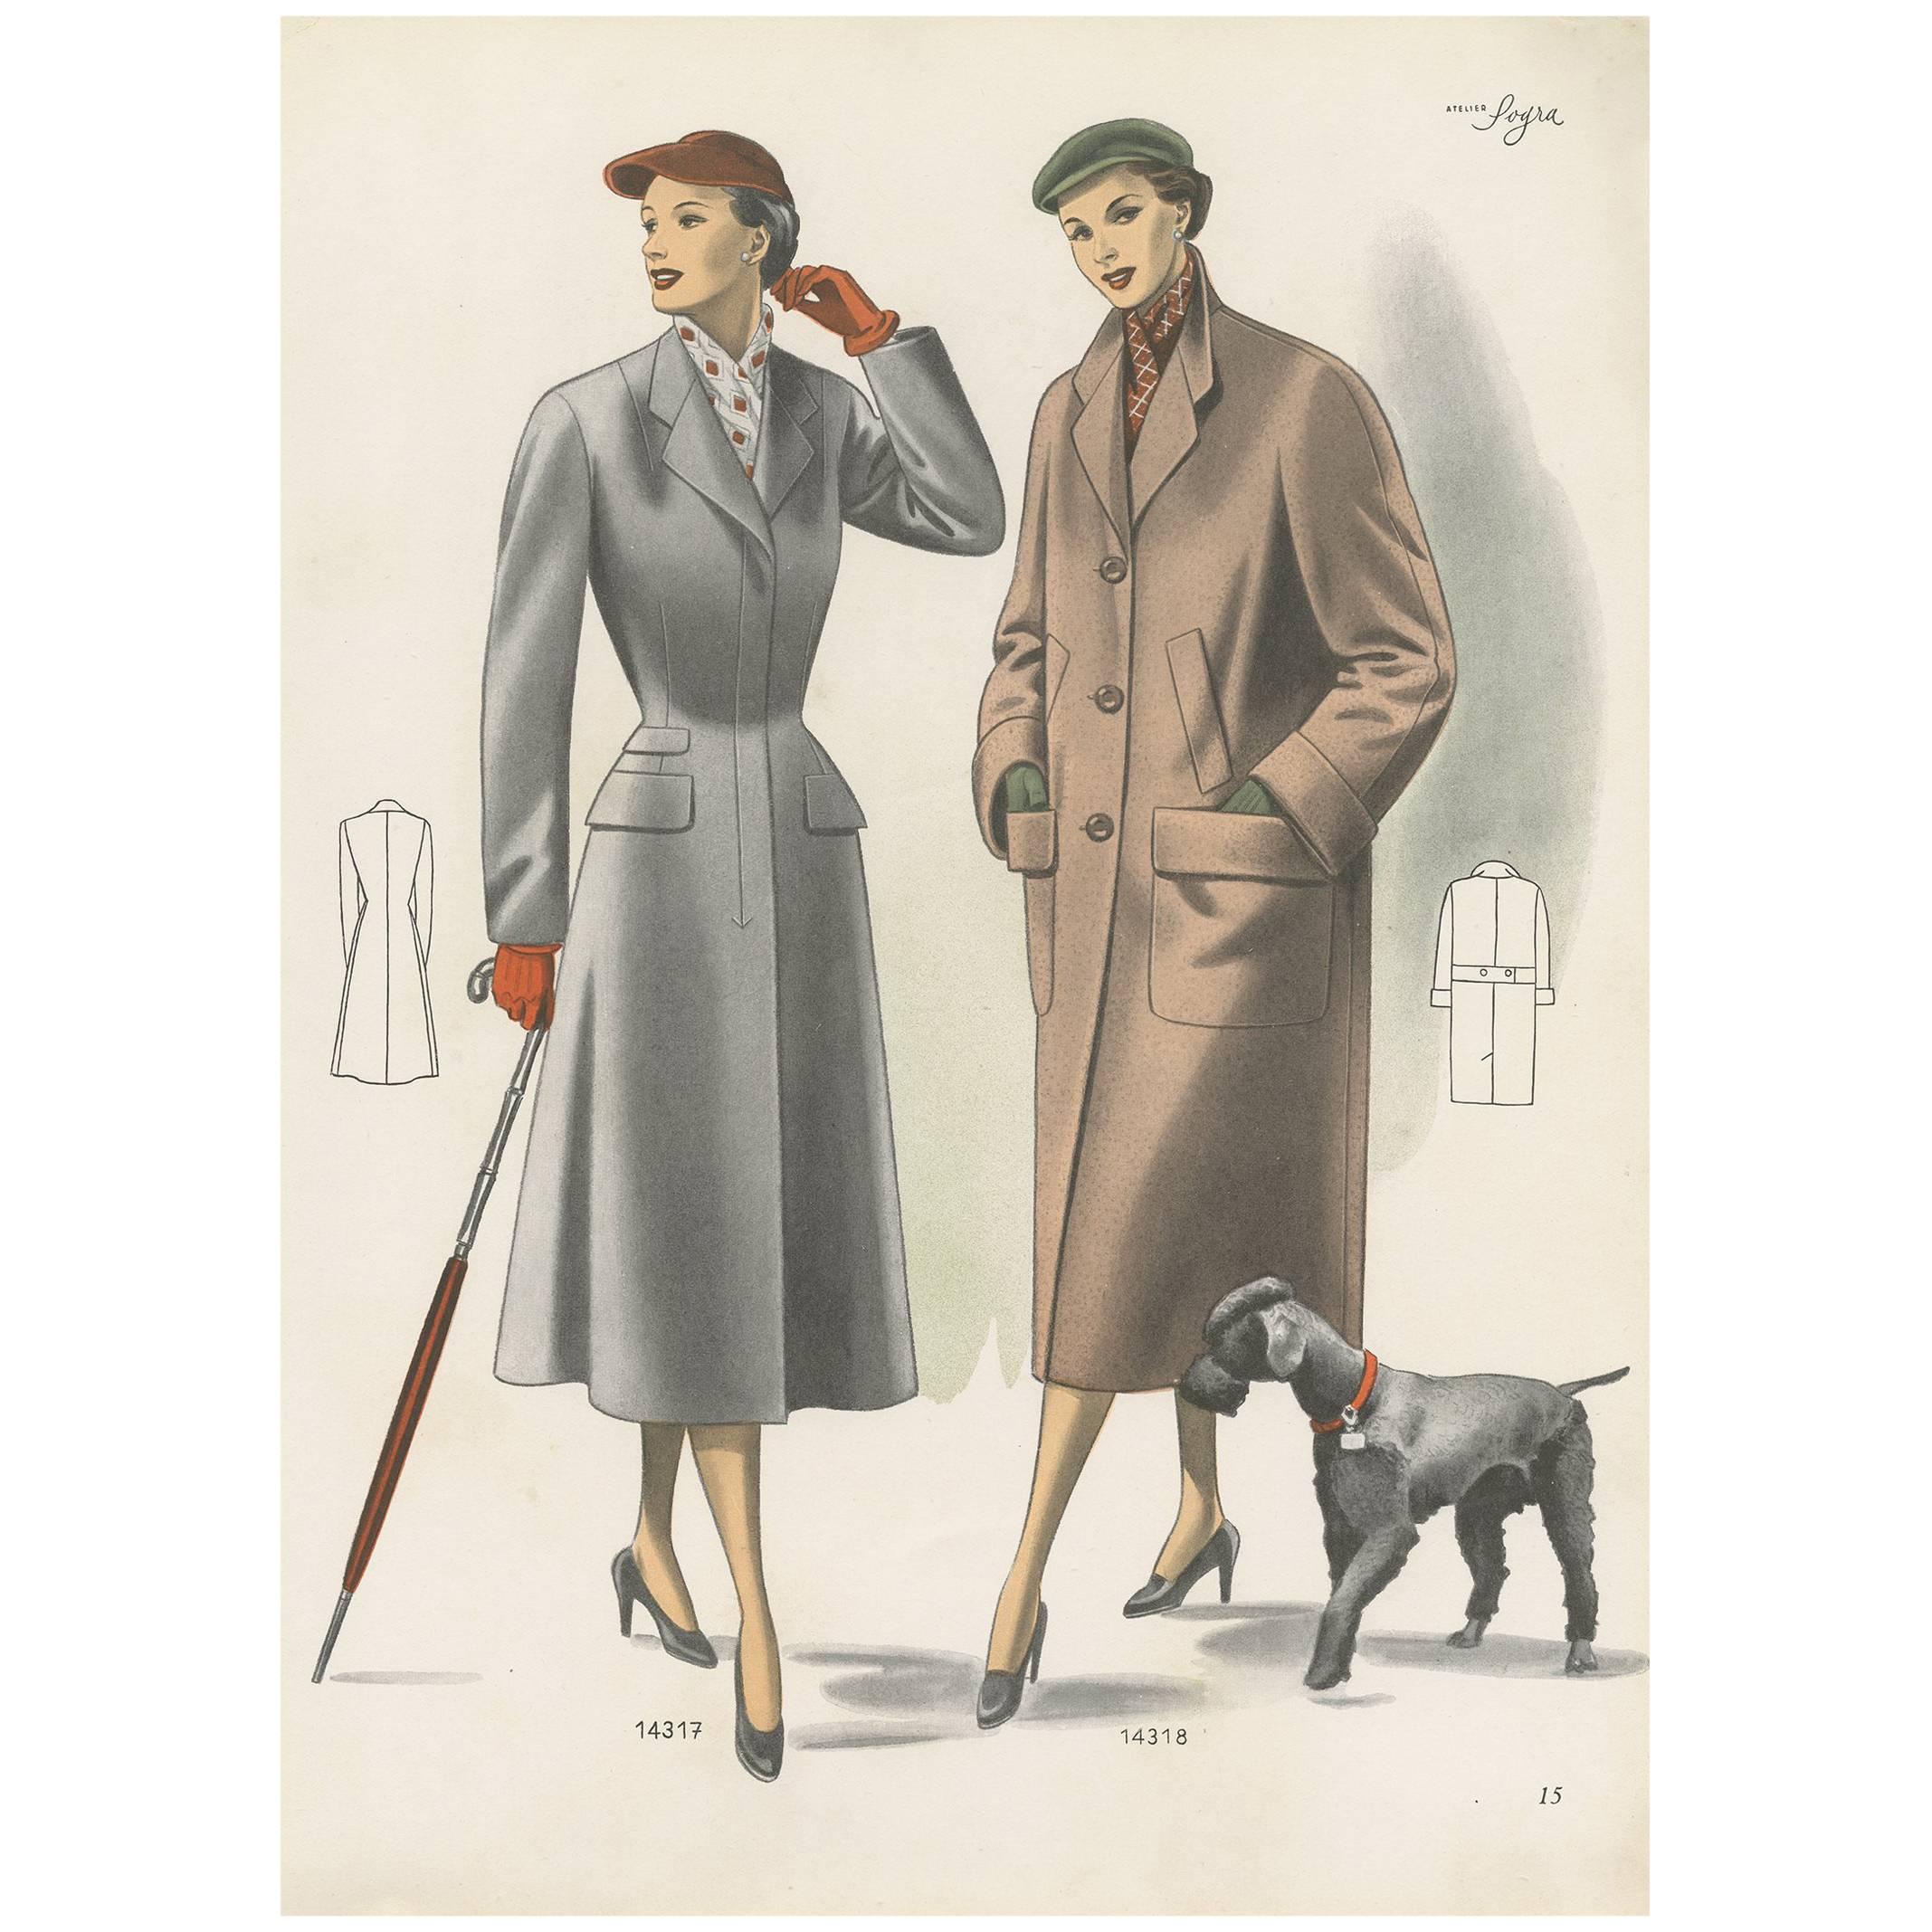 Vintage Fashion Print 'Pl. 14317' Published in Ladies Styles, 1952